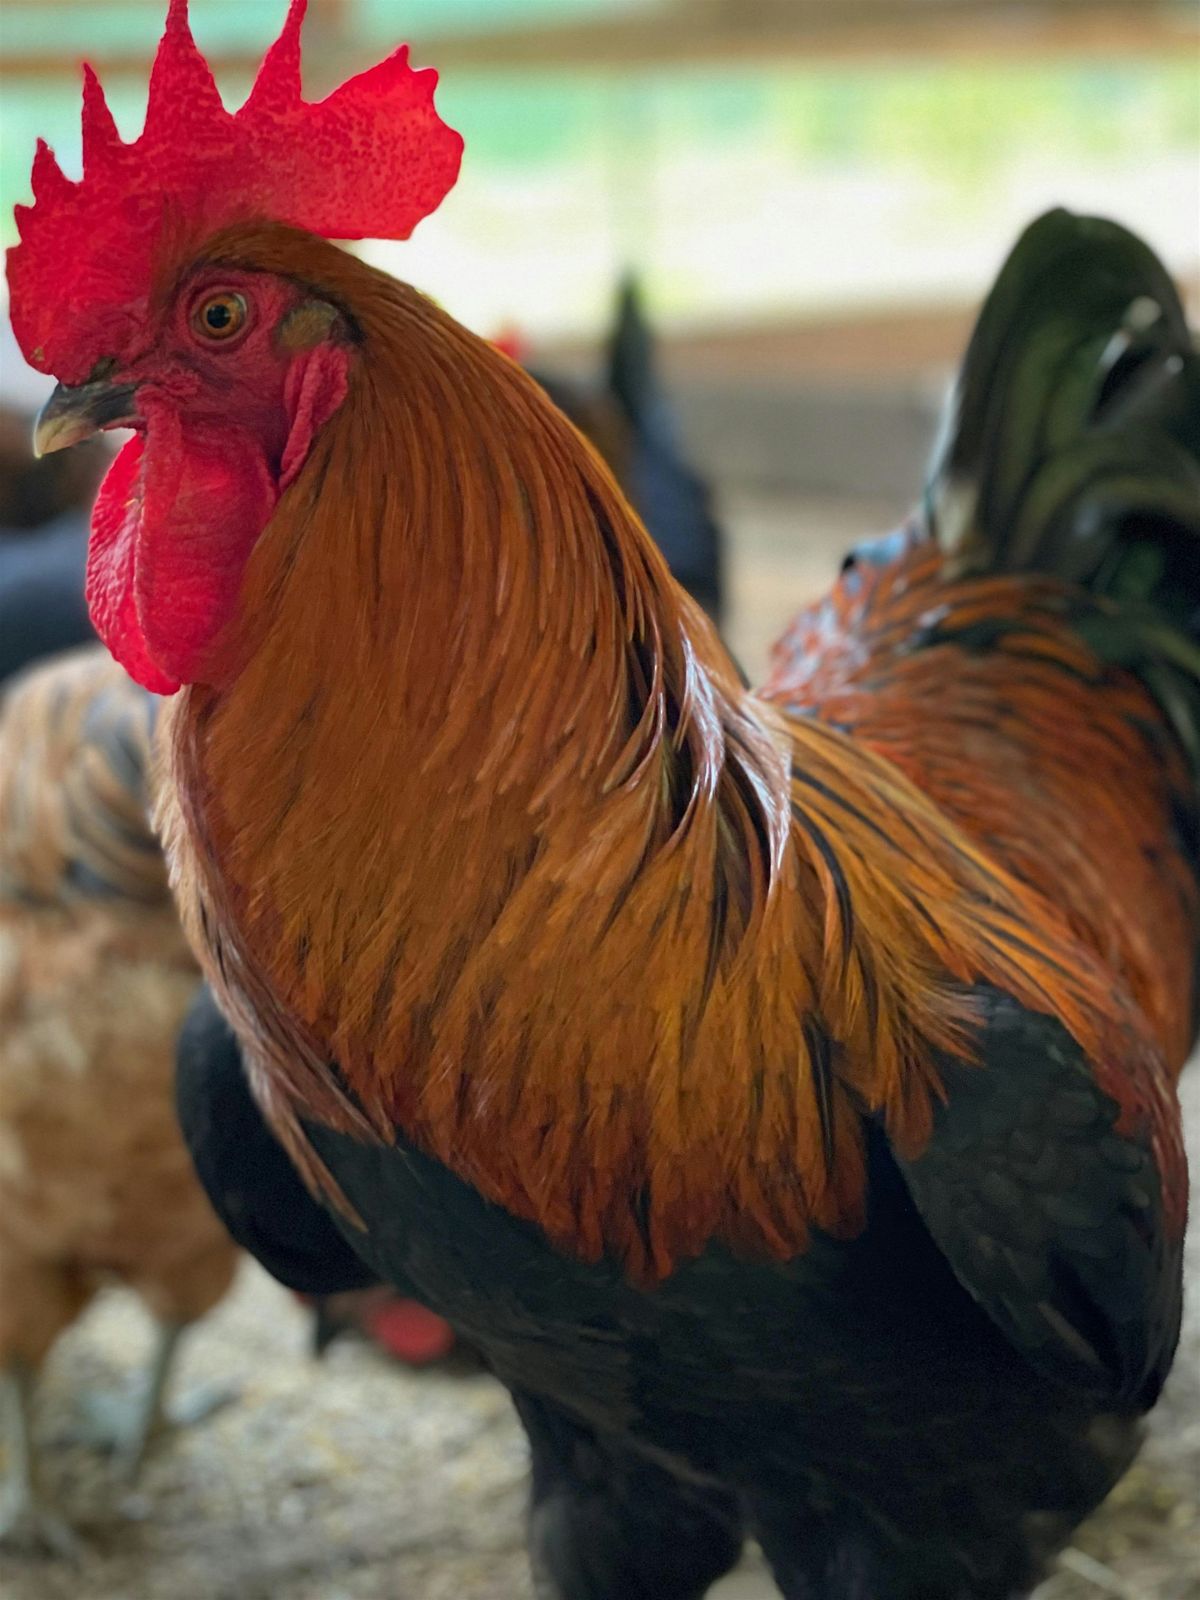 KEEPING BACKYARD CHICKENS for Beginners